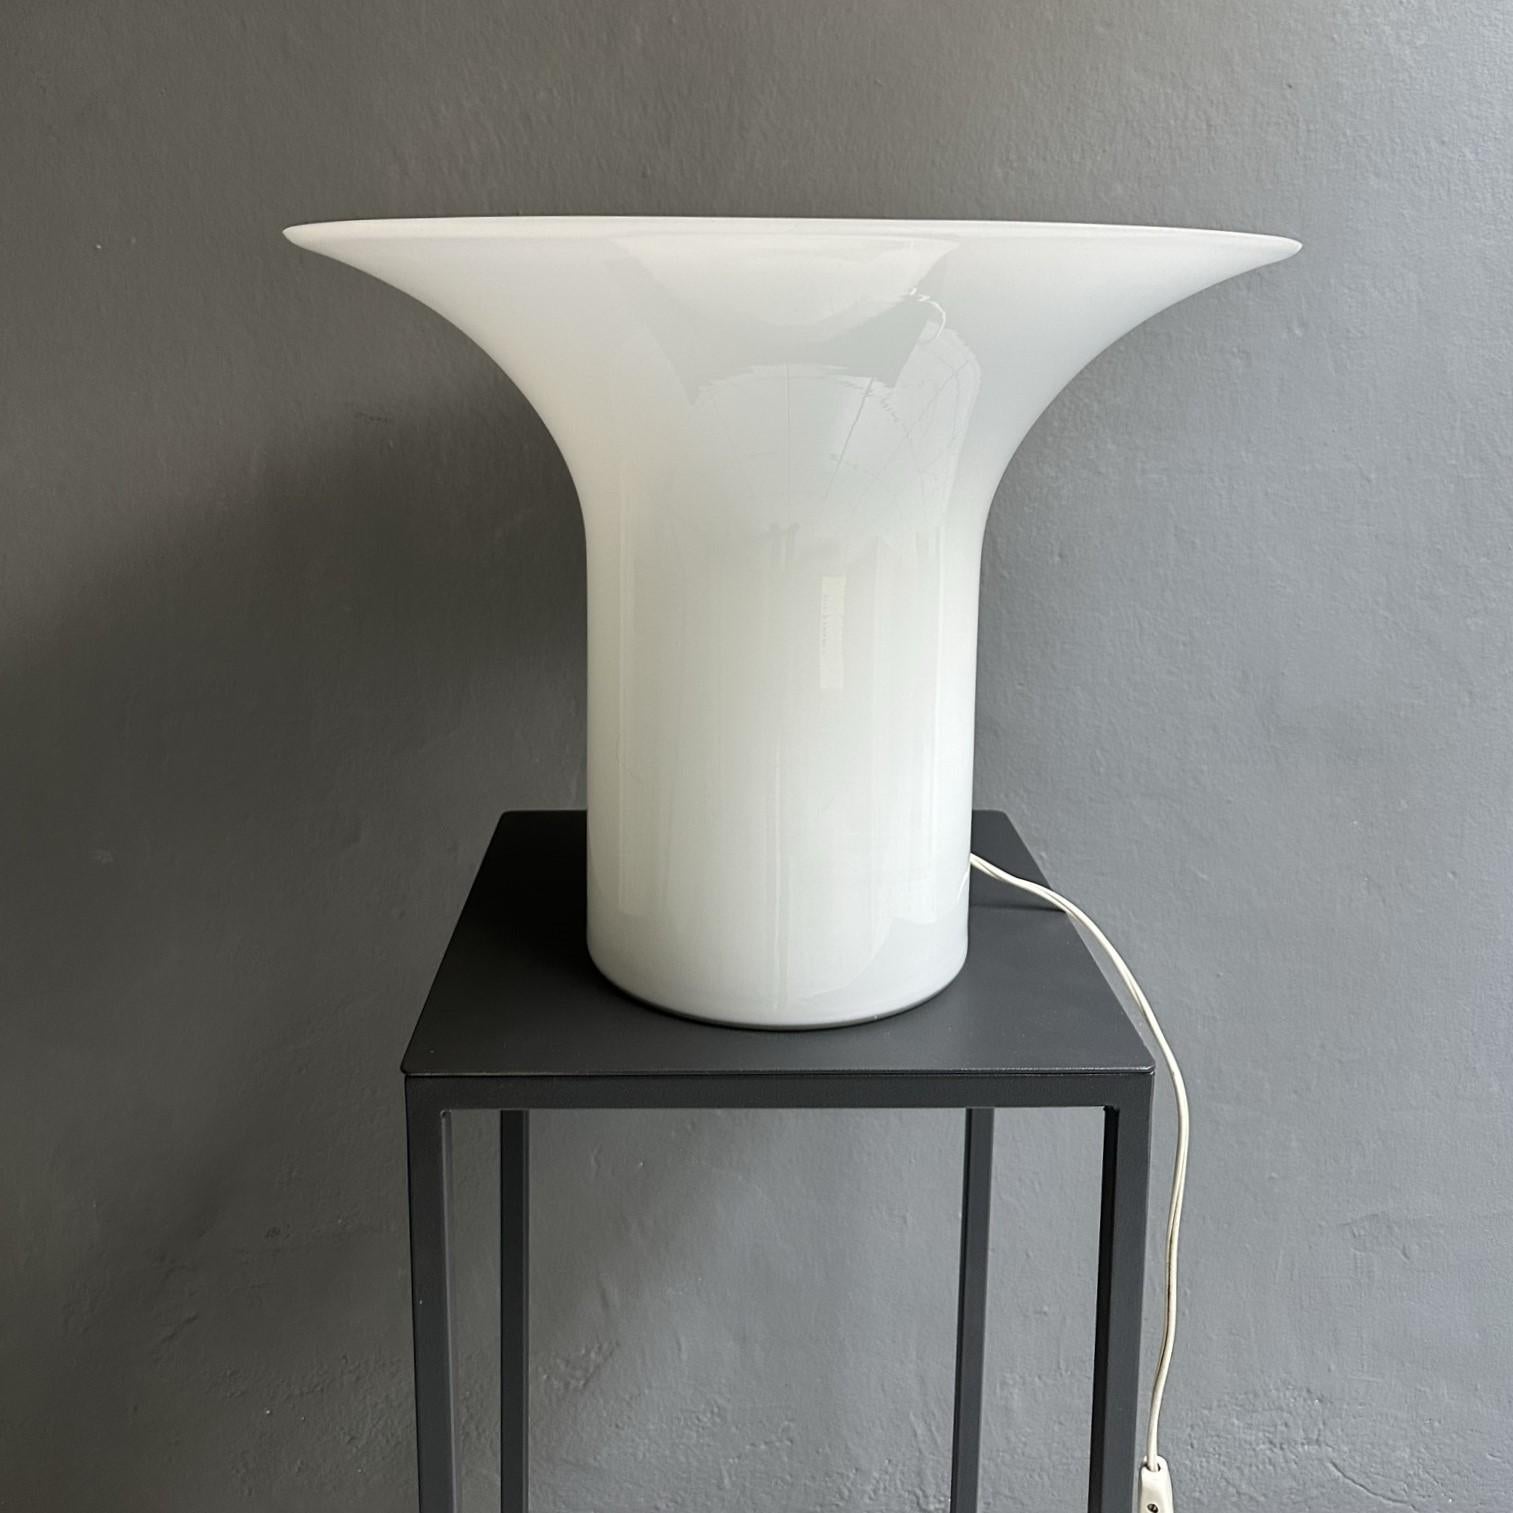 
Seventies lamp, Italian manufacturing
Given its size, the milk white Murano glass lamp can be used both as a table lamp and as a floor lamp, creating a light point.
Dimensions:
Height: 32.5
Diameter: 42.5 cm
The lamp works correctly.
